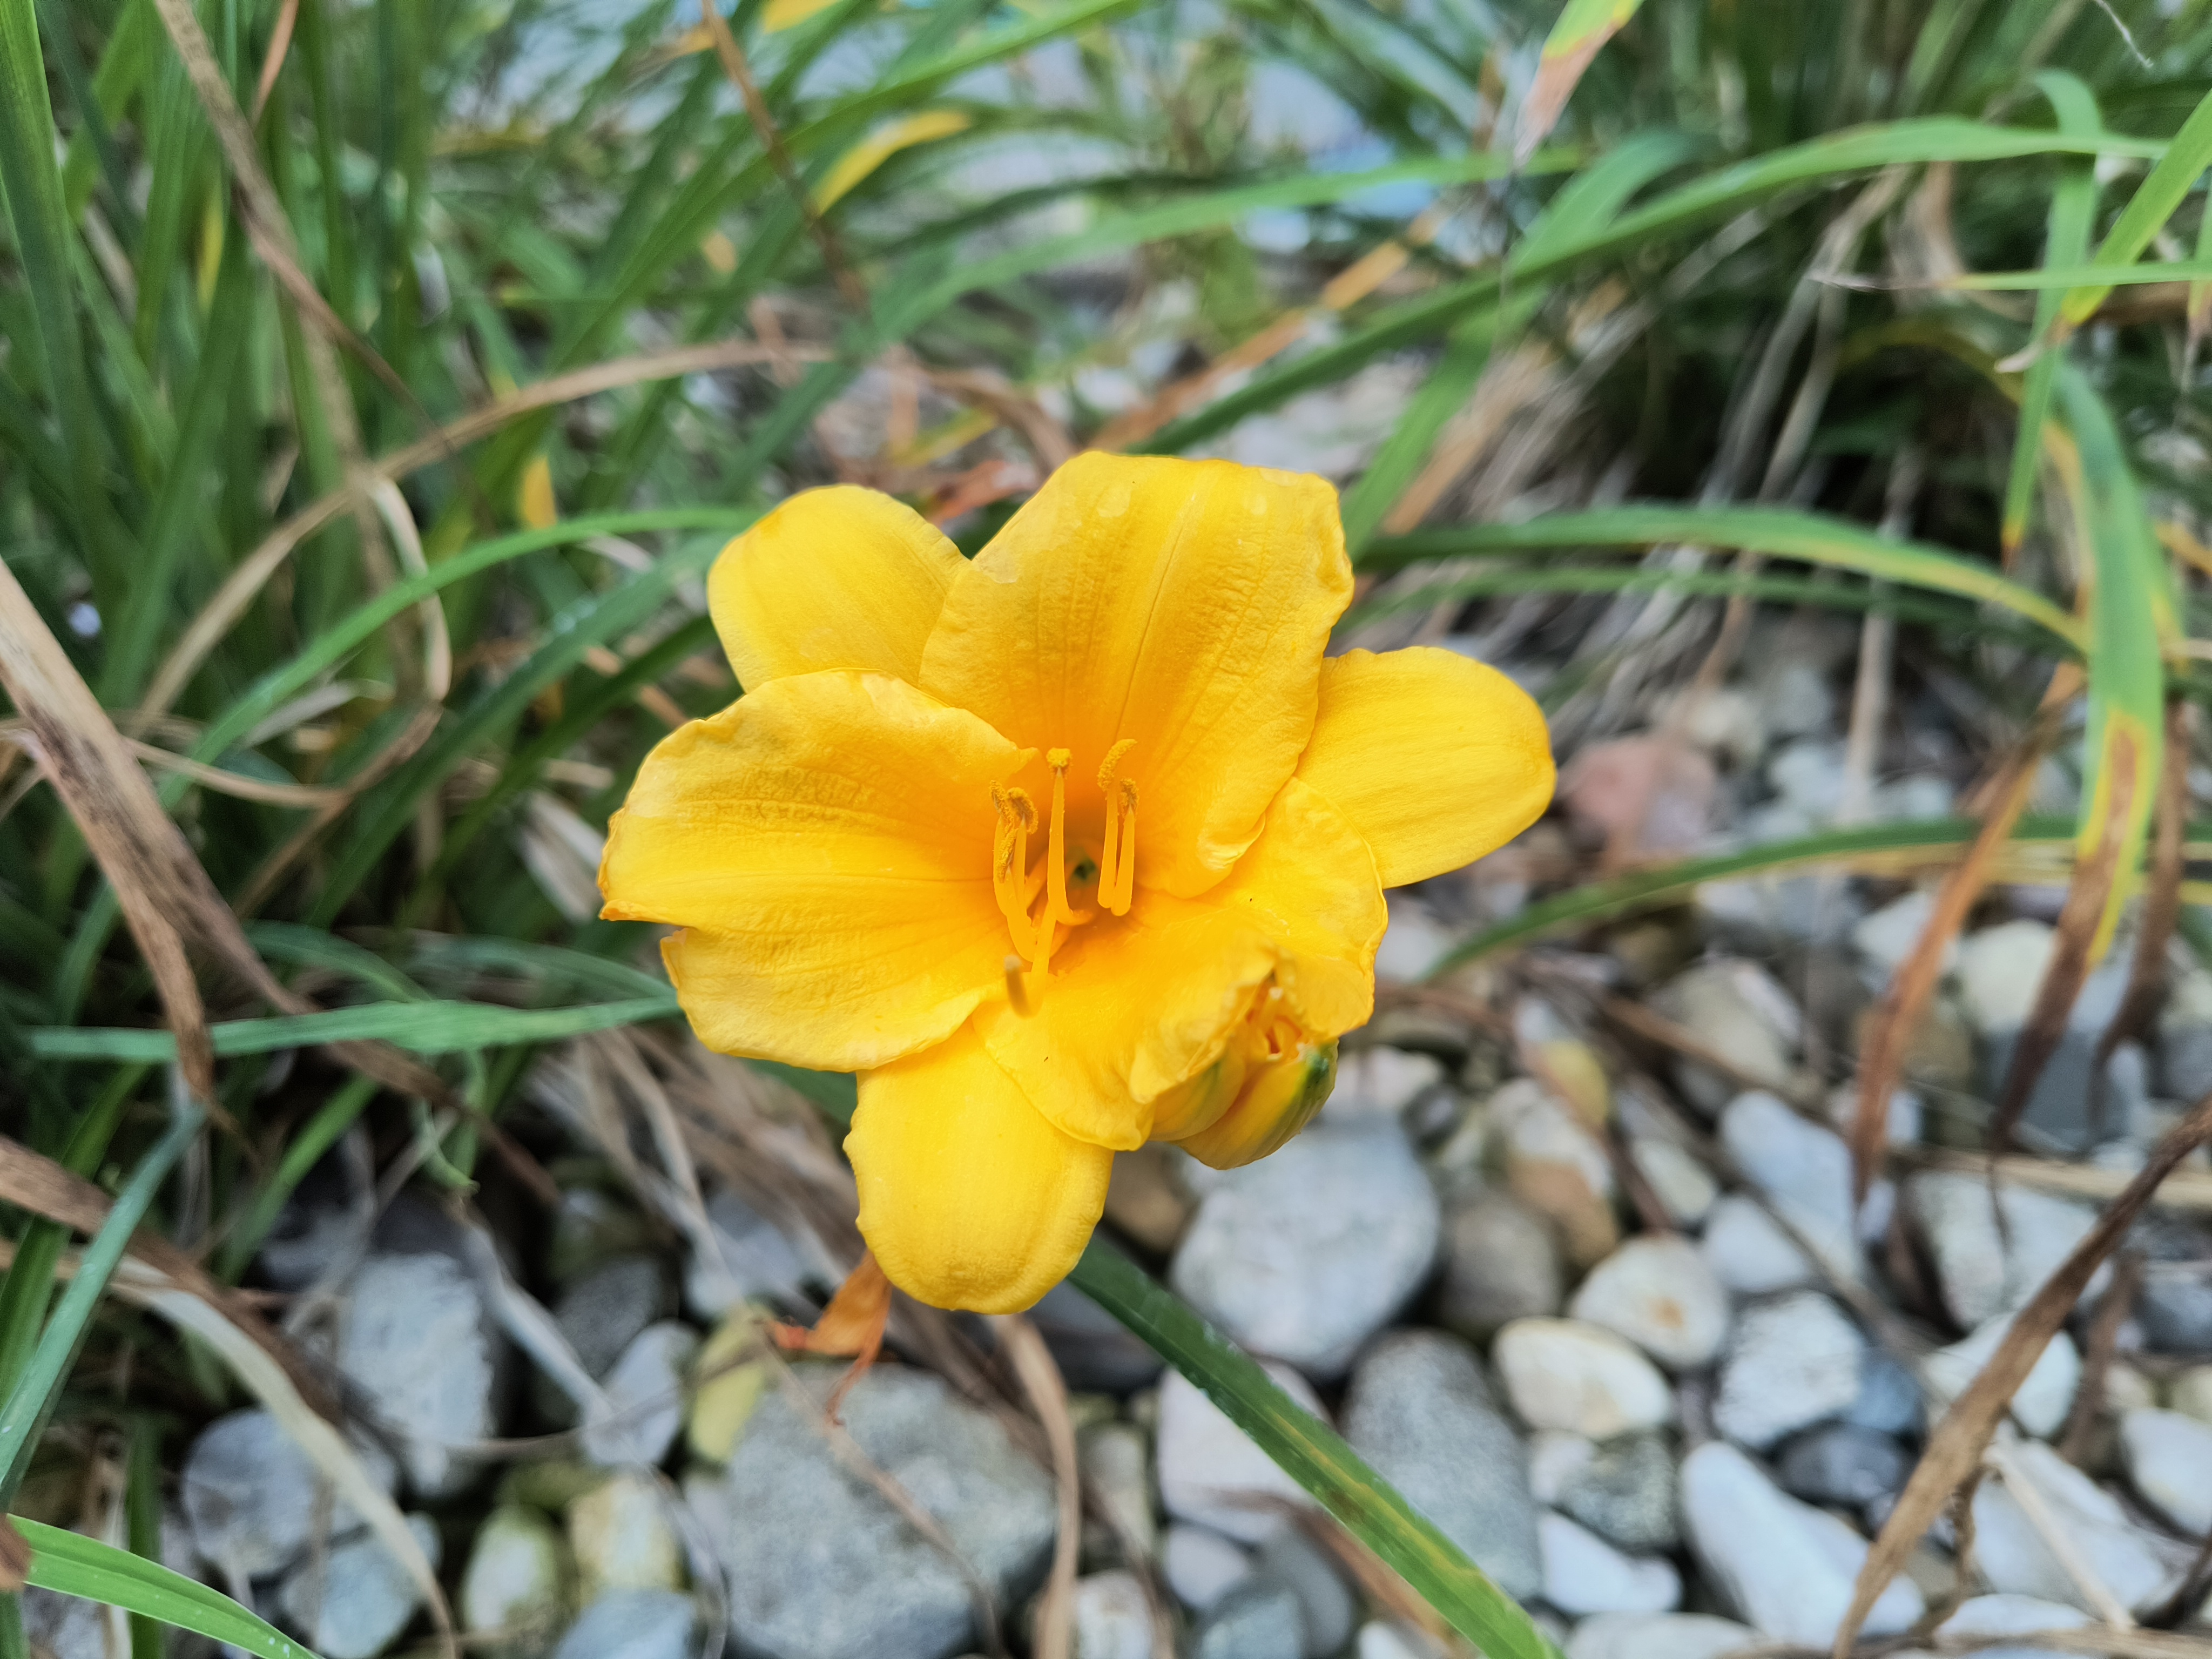 Camera sample of a yellow flower from the Motorola Edge (2022).